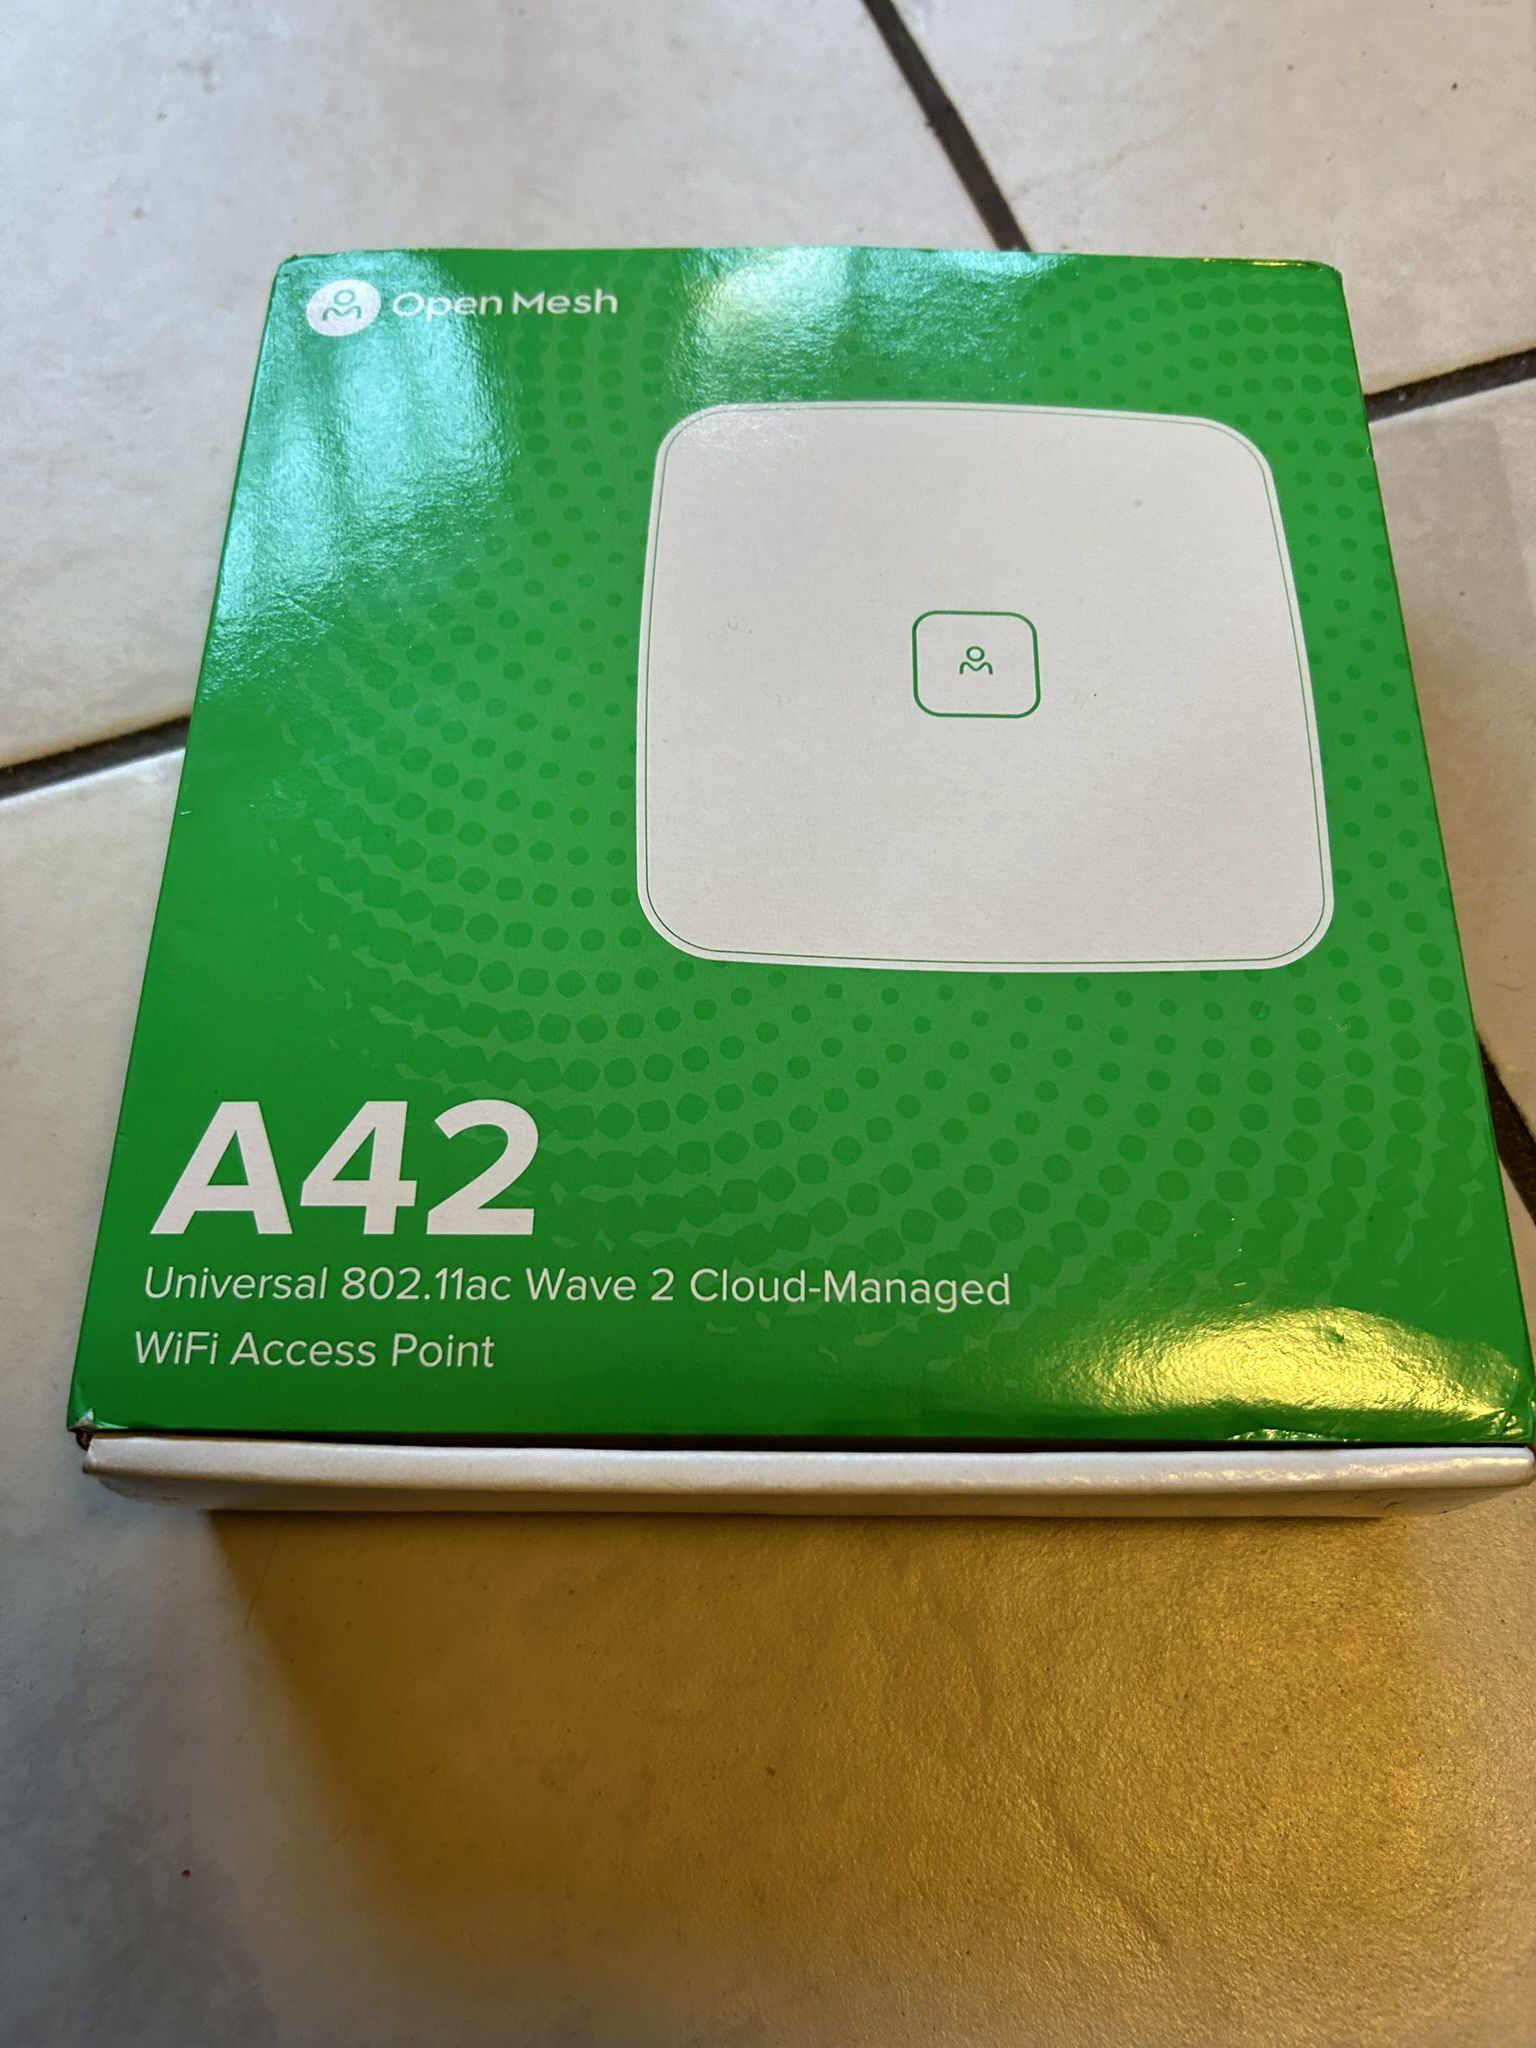 OpenMesh A42 802.11ac Wave 2 Cloud WiFi Router